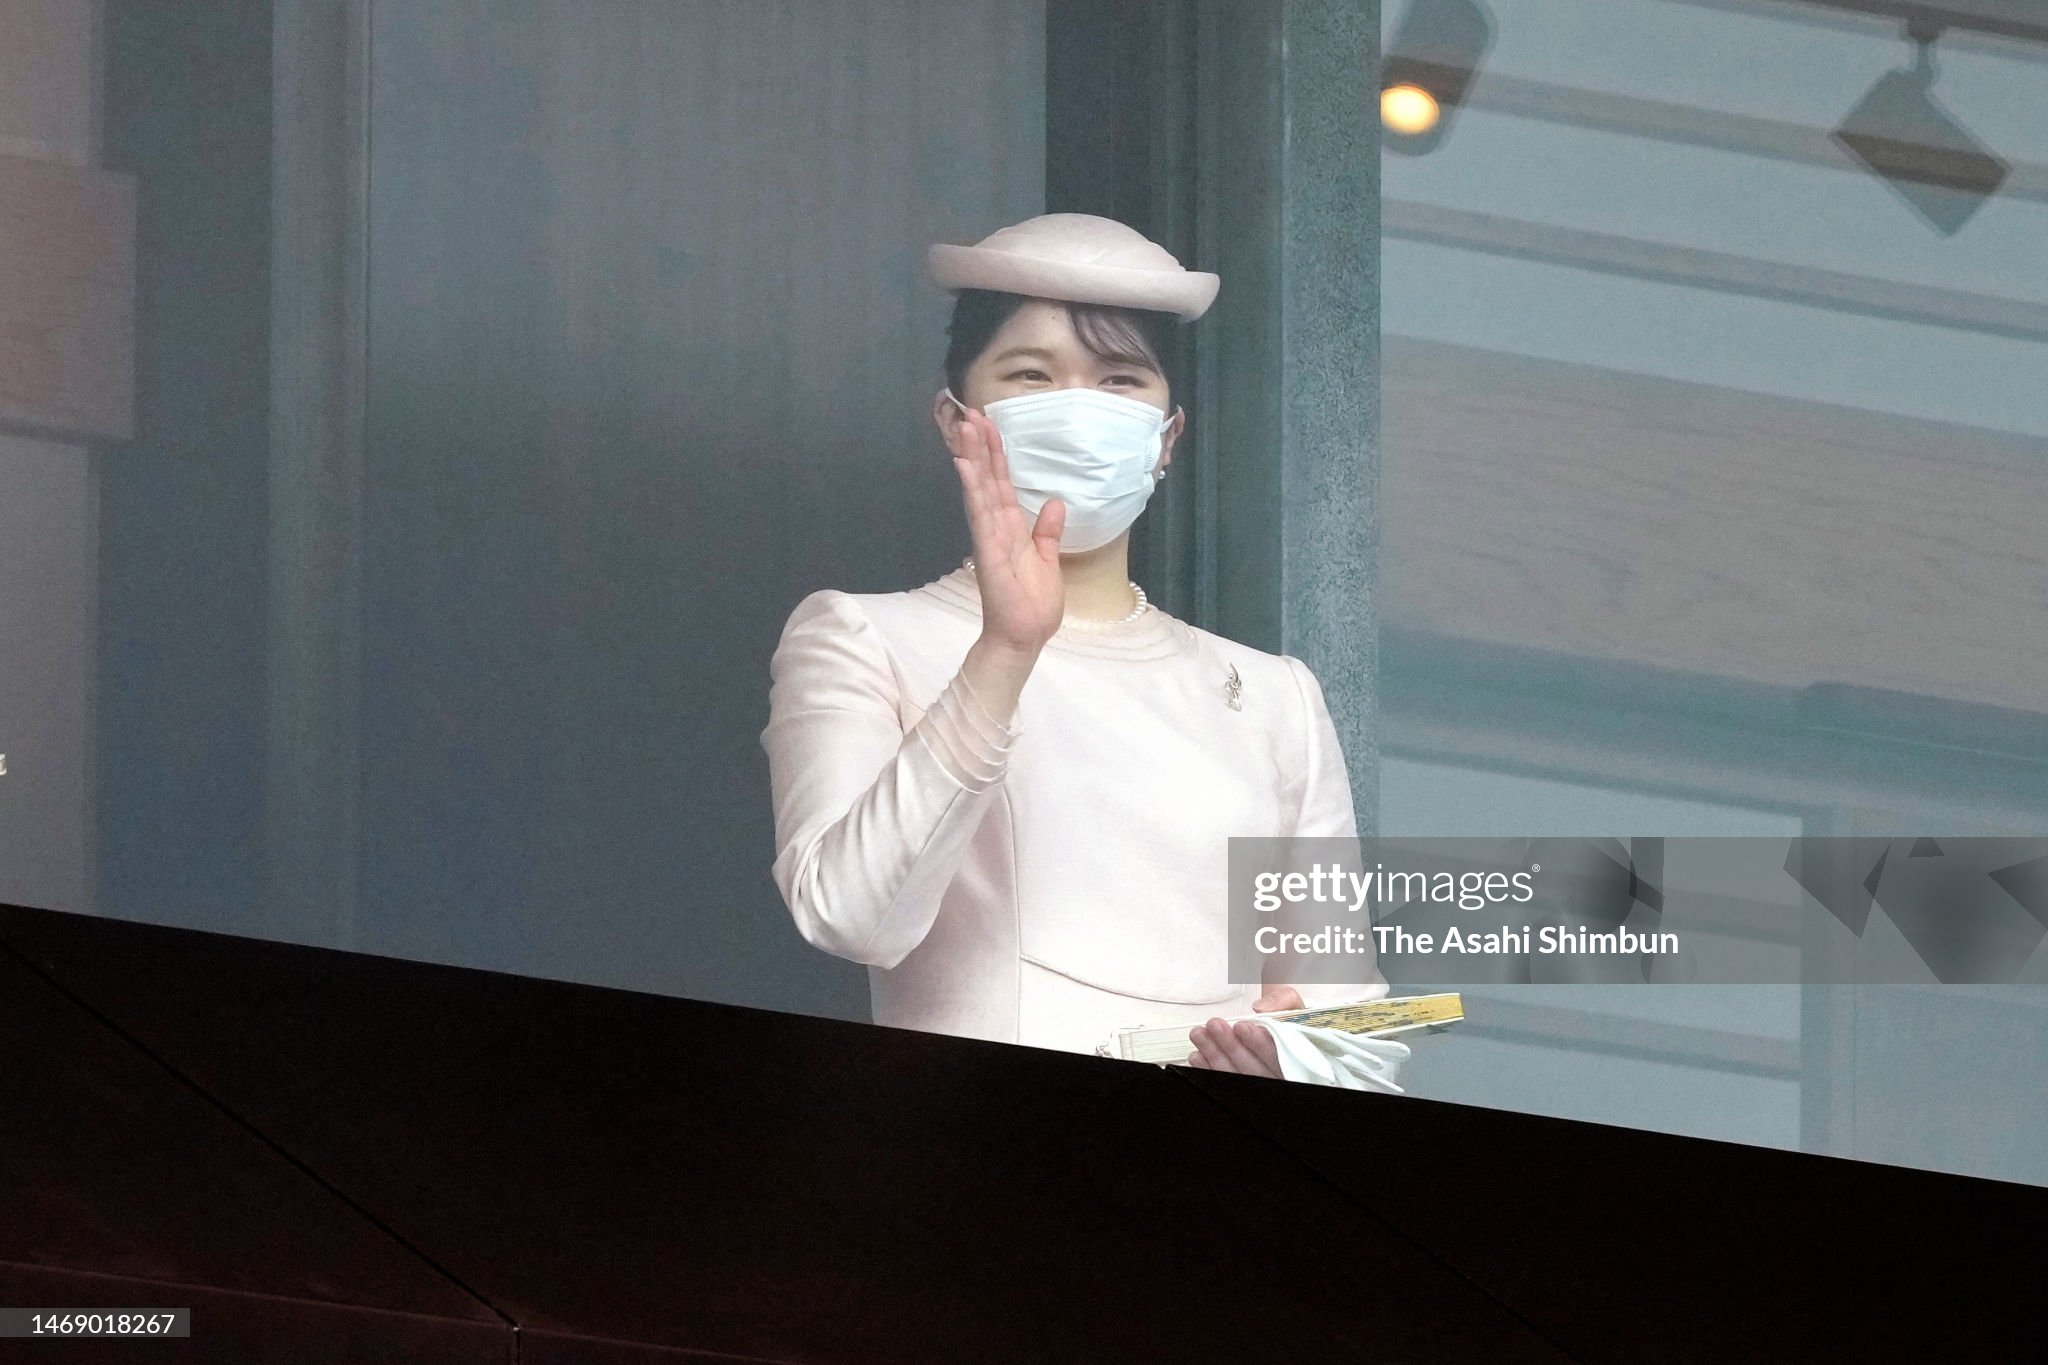 princess-aiko-waves-to-well-wishers-during-emperor-naruhitos-birthday-celebration-at-the.jpg